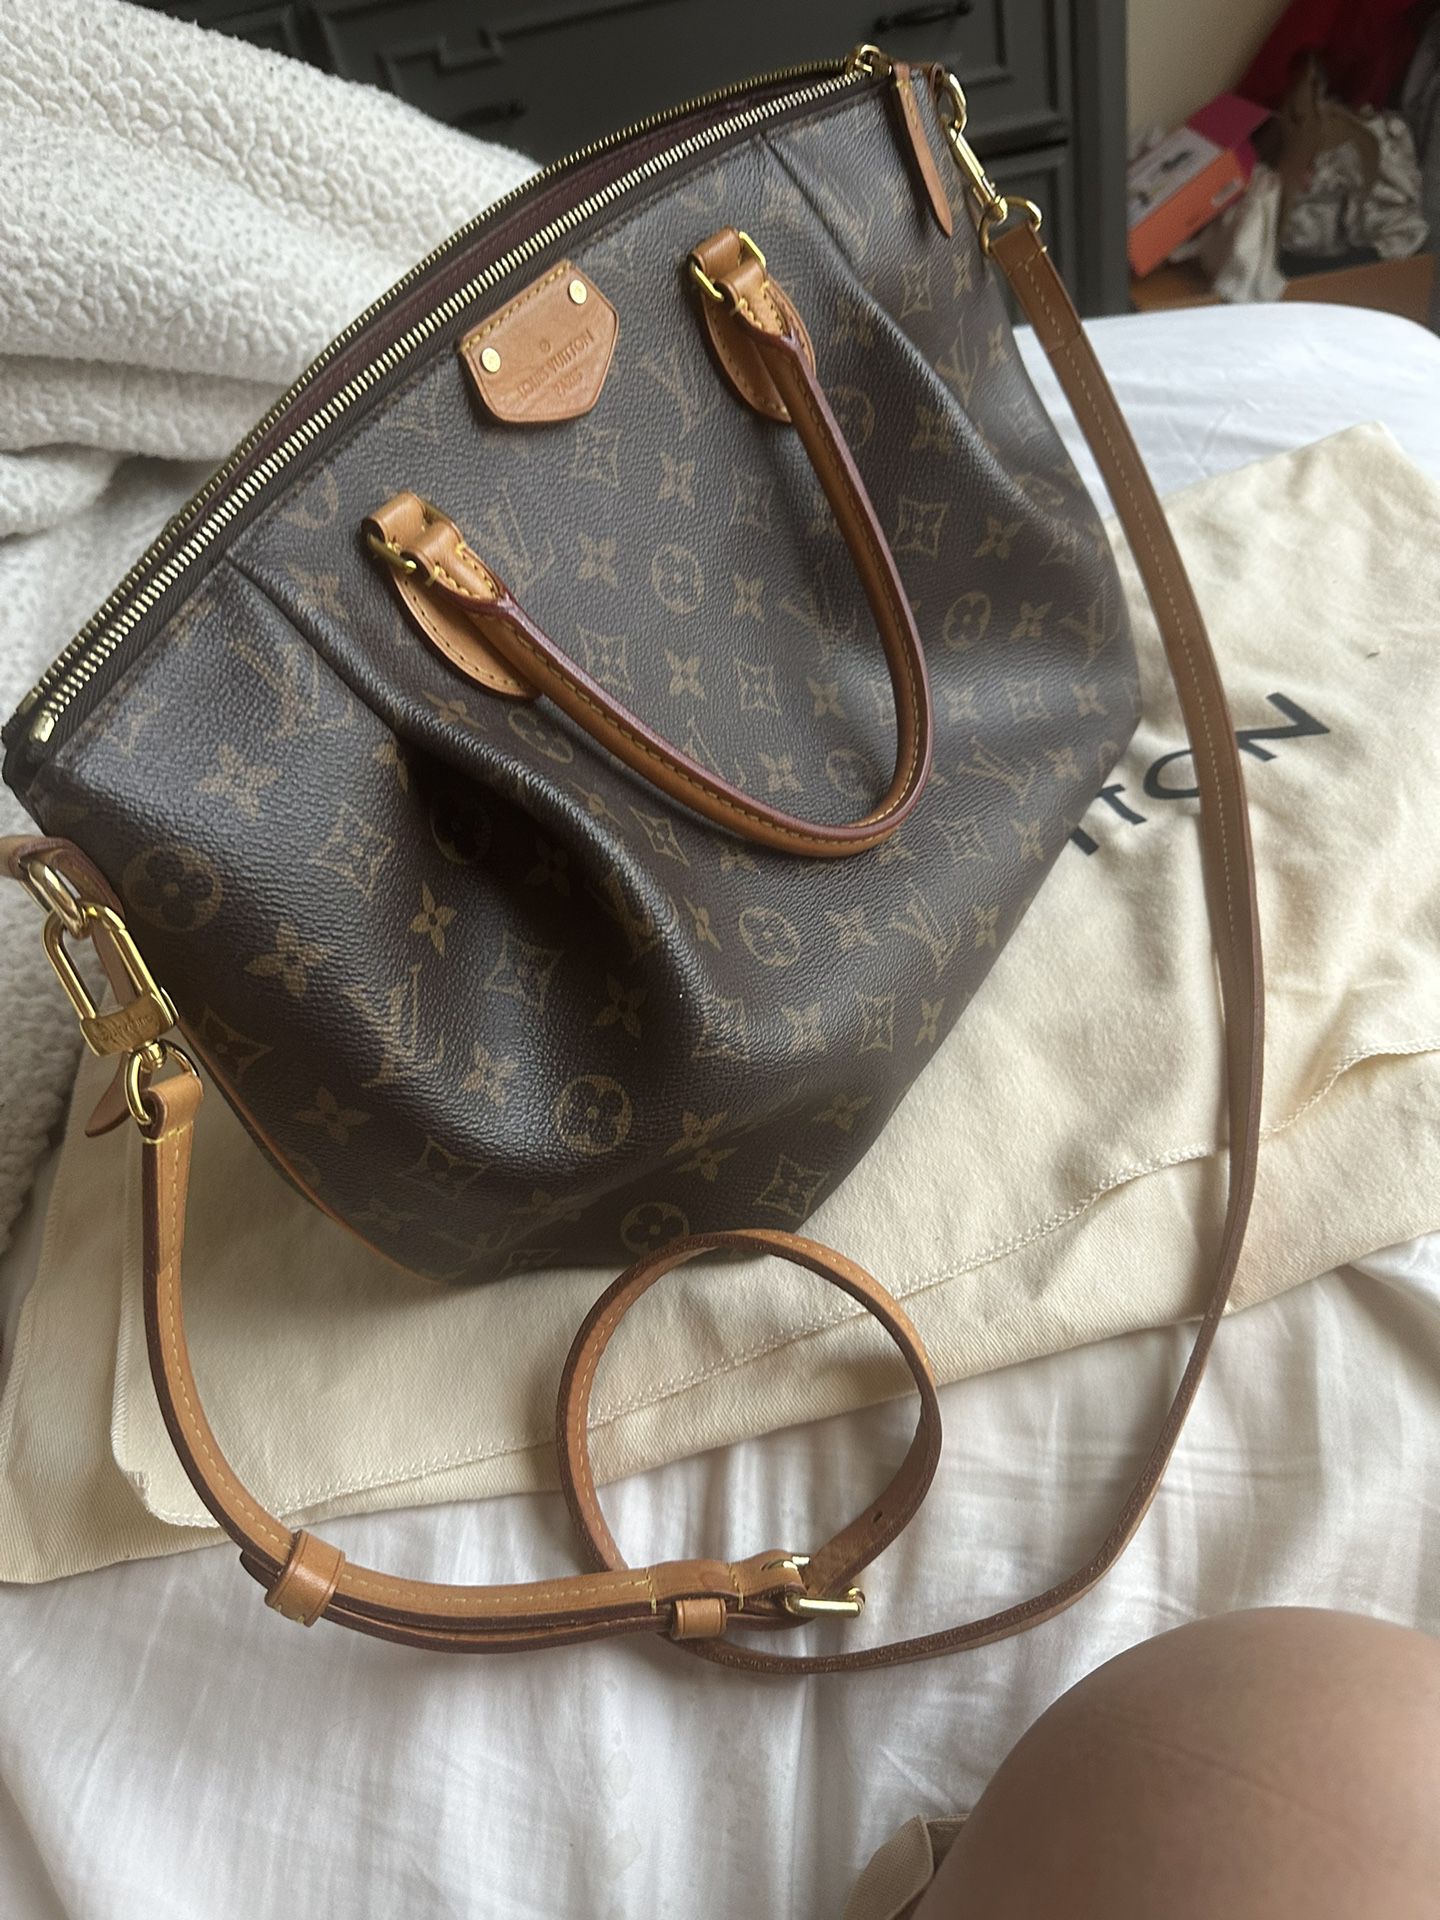 Louis Vuitton Turenne MM New *Authentic* for Sale in Denver, CO - OfferUp